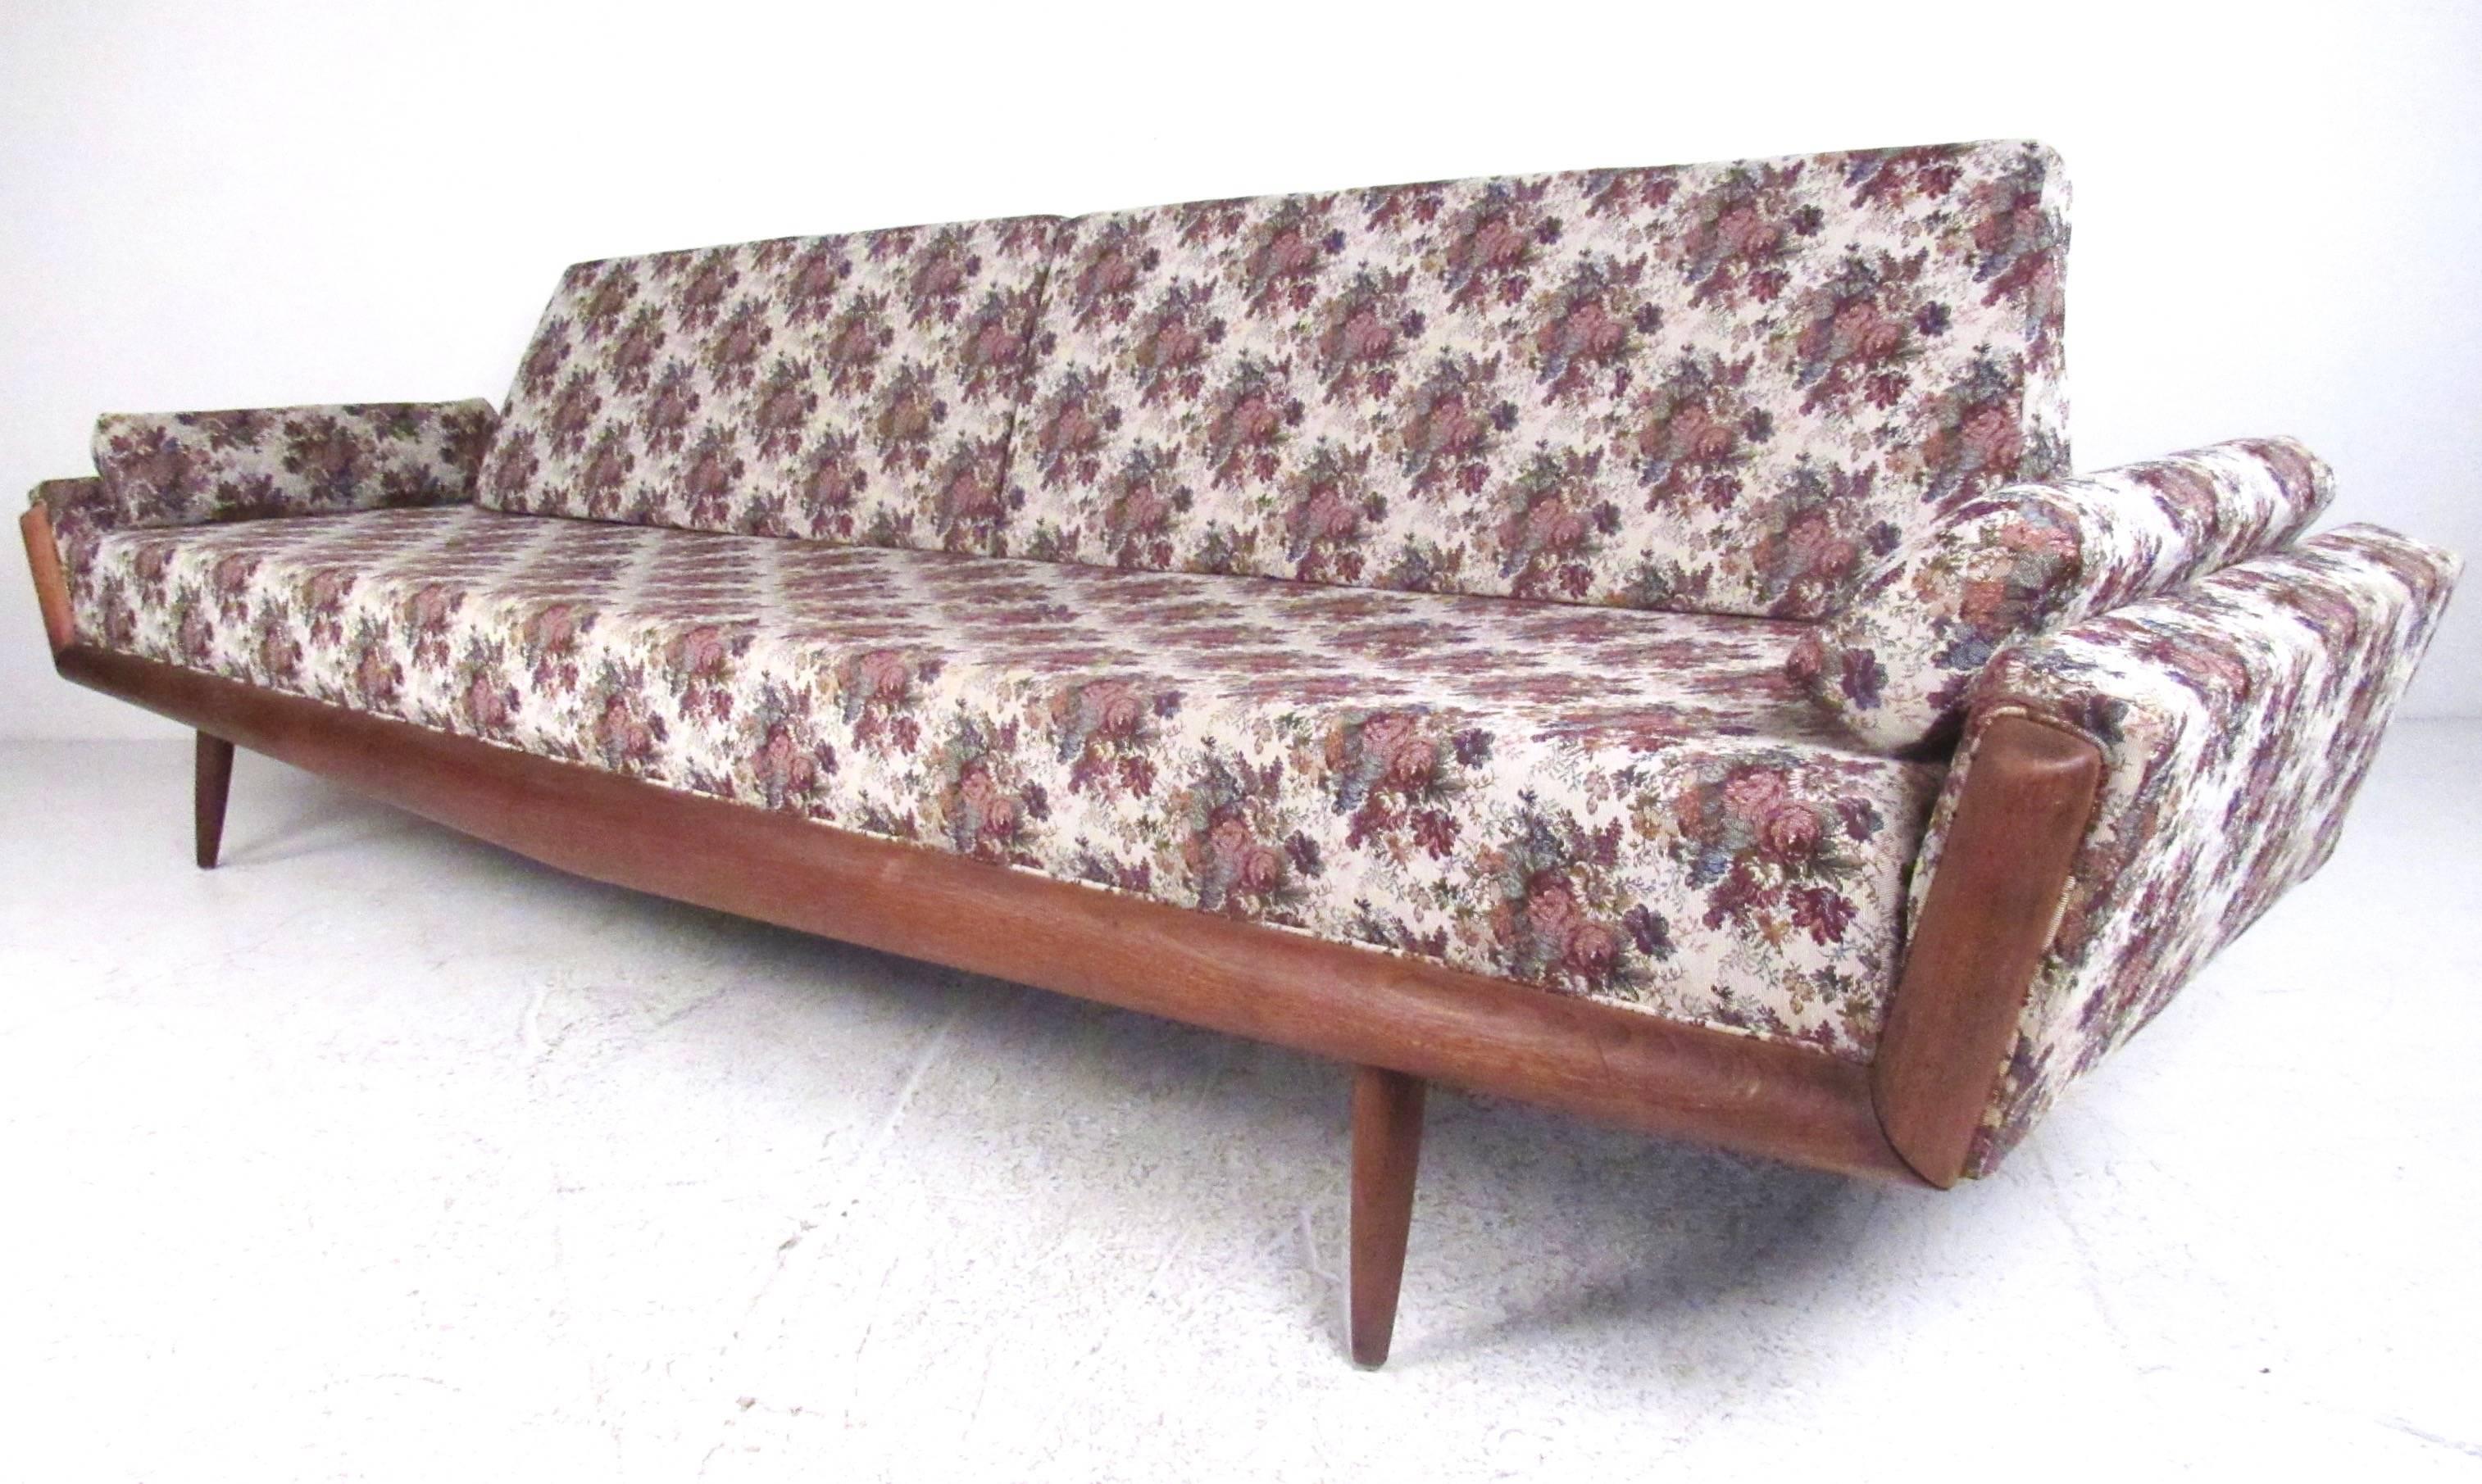 This unique Mid-Century sofa features a stylish walnut frame with unique sculpted armrests and seatback. Tapered hardwood legs complement the vintage modern floral covering, making it an impressive oversized seating option for home or business use.